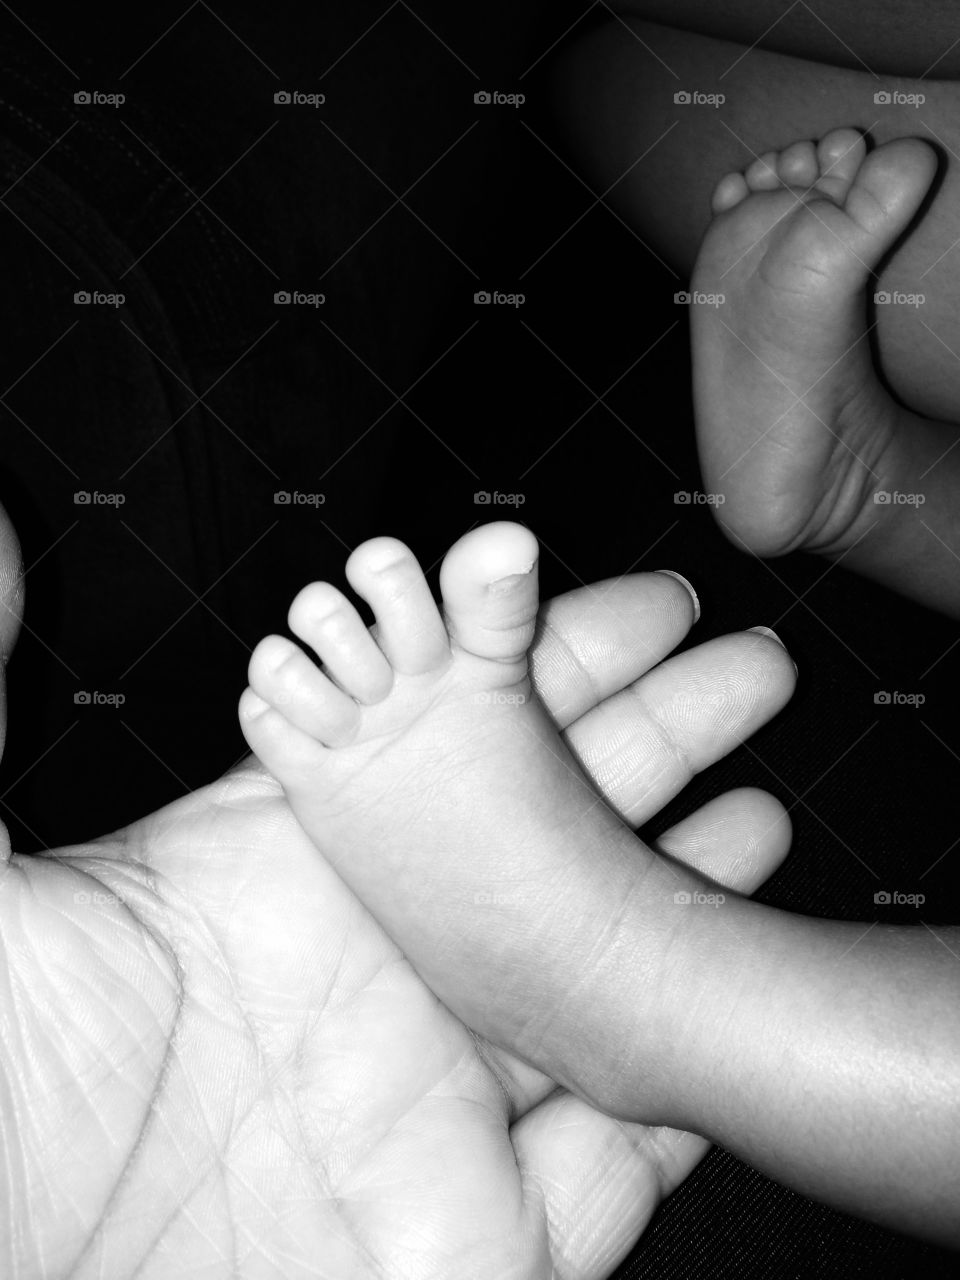 #babyfoot #baby #hand #life #cute #little